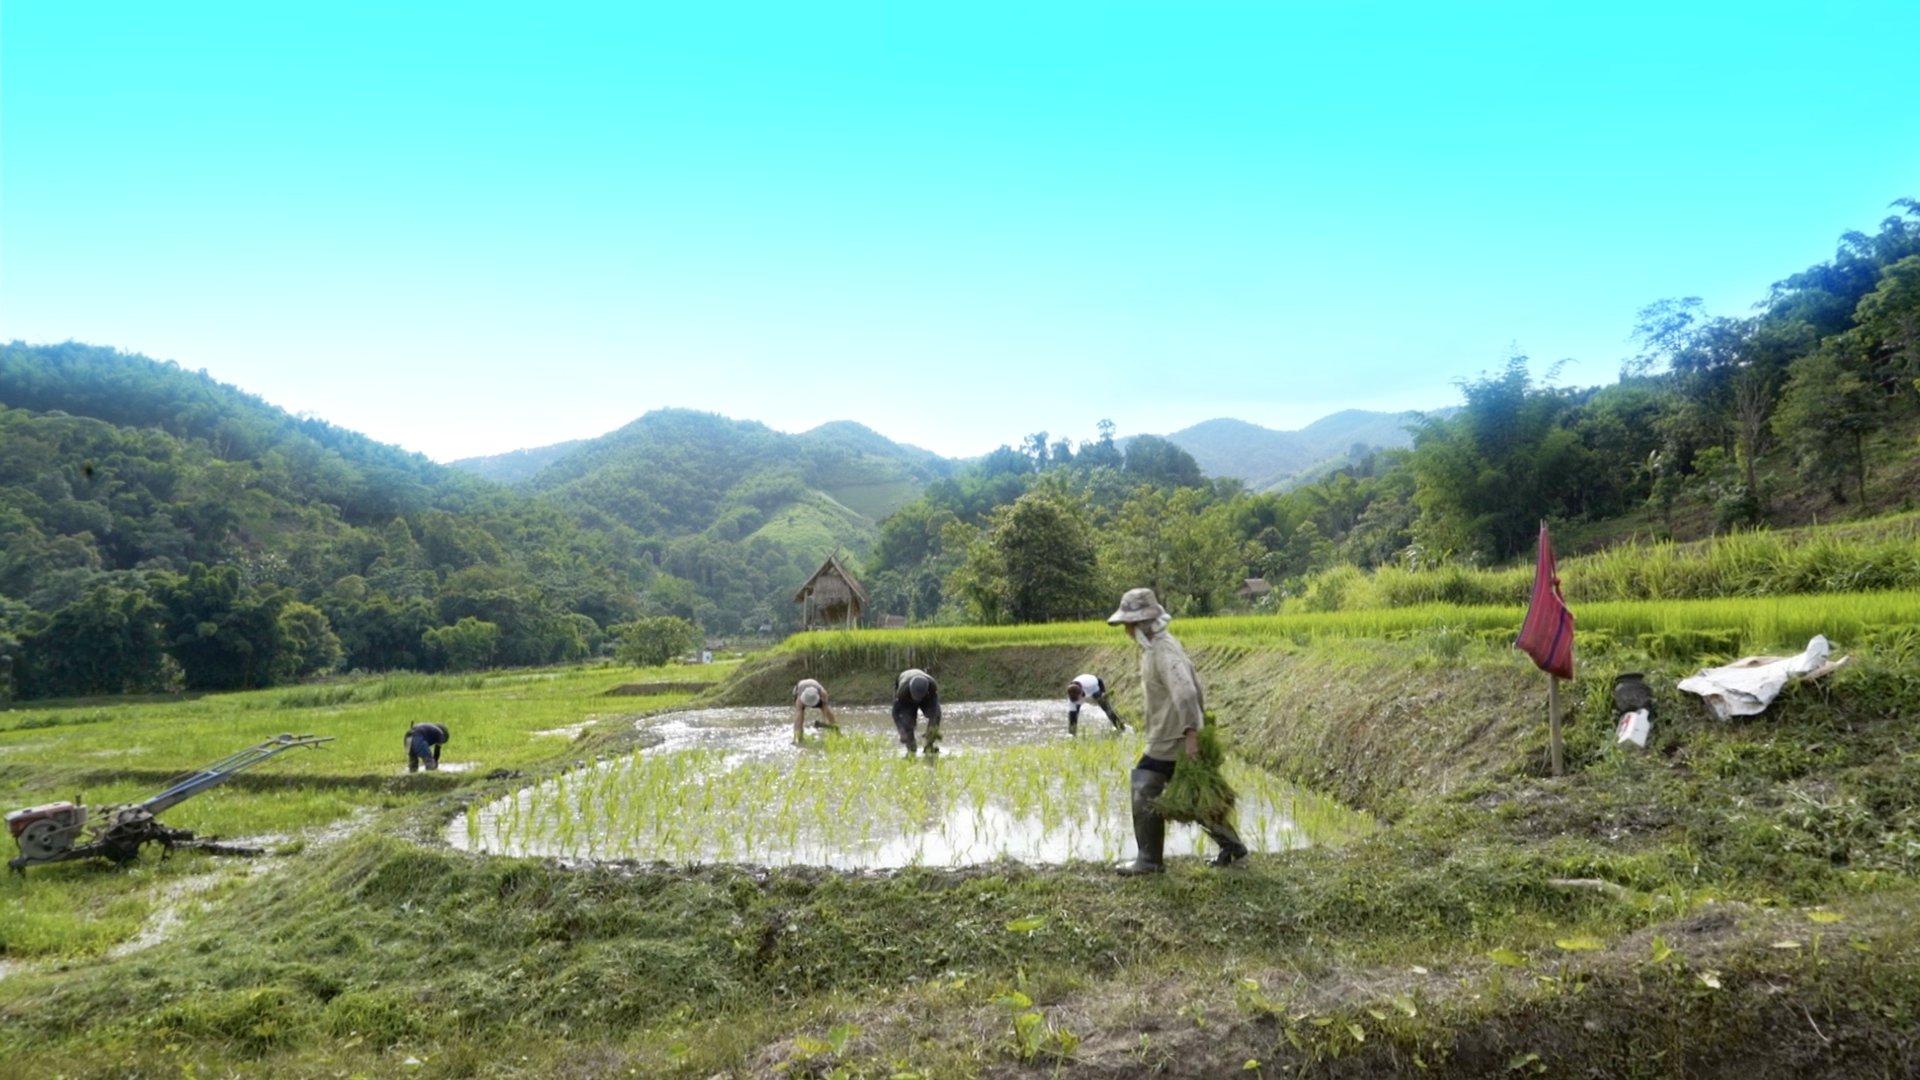 Nestled in the hills of Chiang Rai, visitors are welcome to experience the simple life as a farmer at Tigerland Rice Farm.